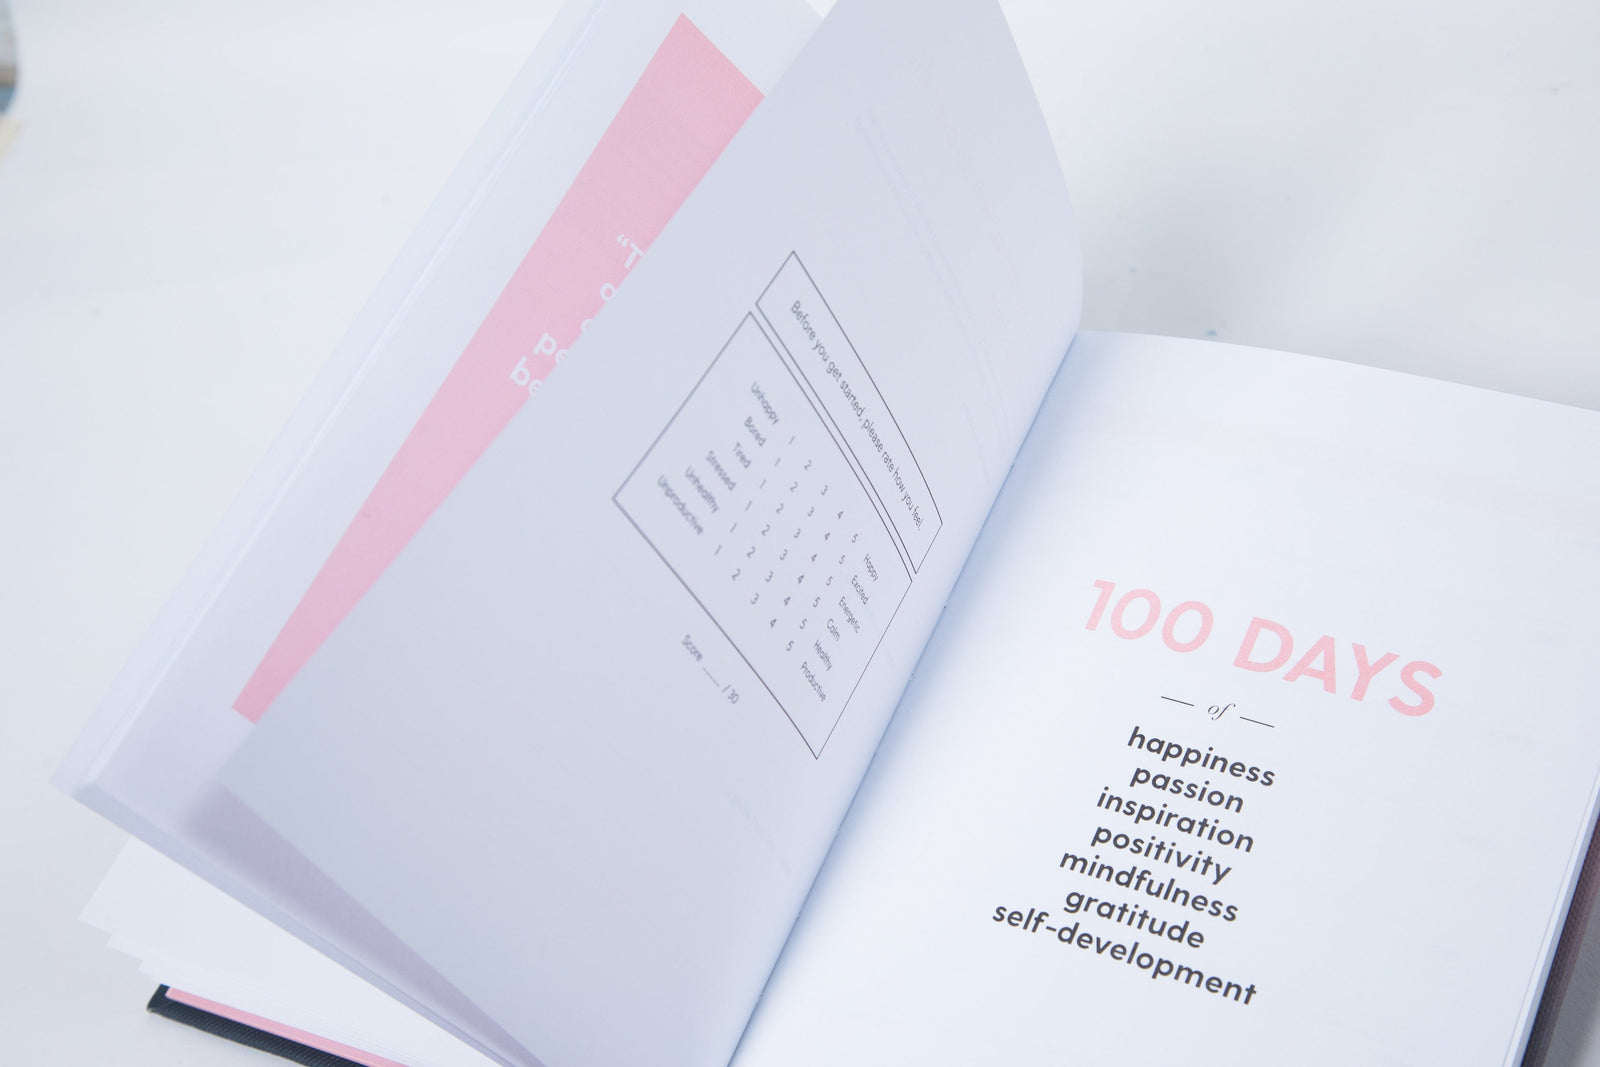 The 100-Day Planner | Pink & Charcoal - The 100-Day Planner | Pink & Charcoal